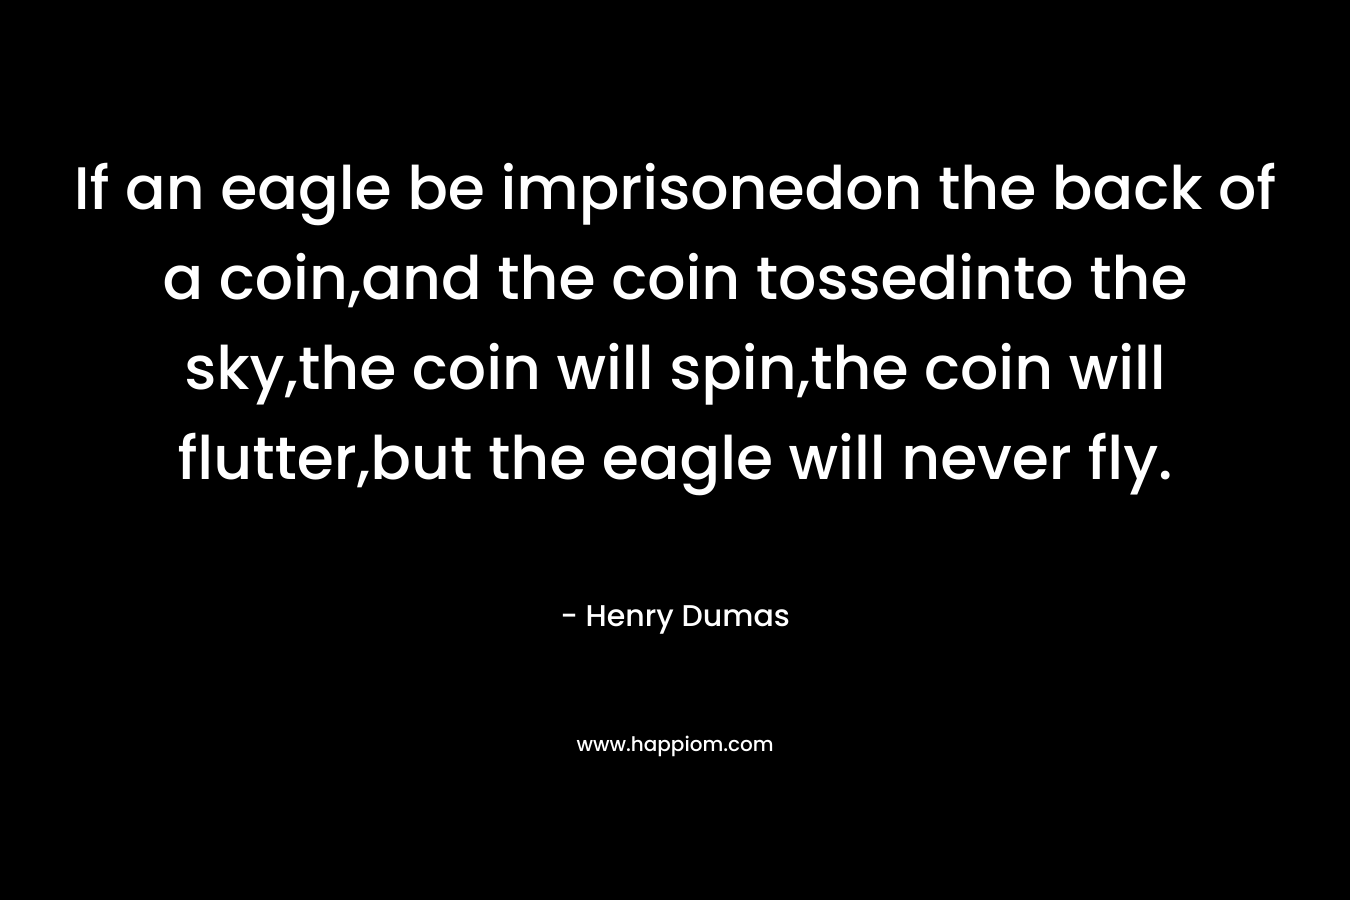 If an eagle be imprisonedon the back of a coin,and the coin tossedinto the sky,the coin will spin,the coin will flutter,but the eagle will never fly.